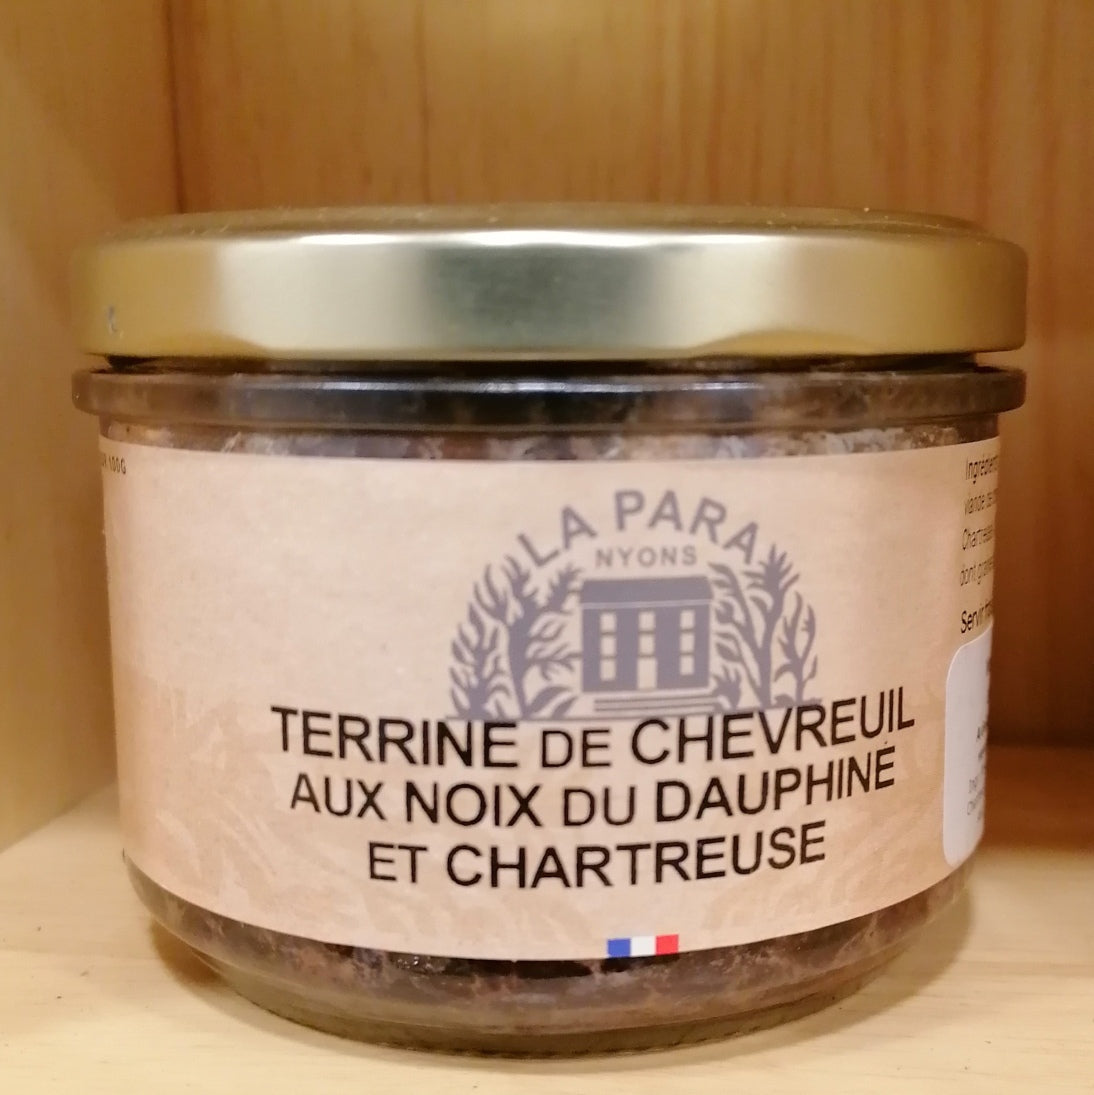 Venison pate with walnuts (from Dauphine) and Chartreuse liqueur (200g)